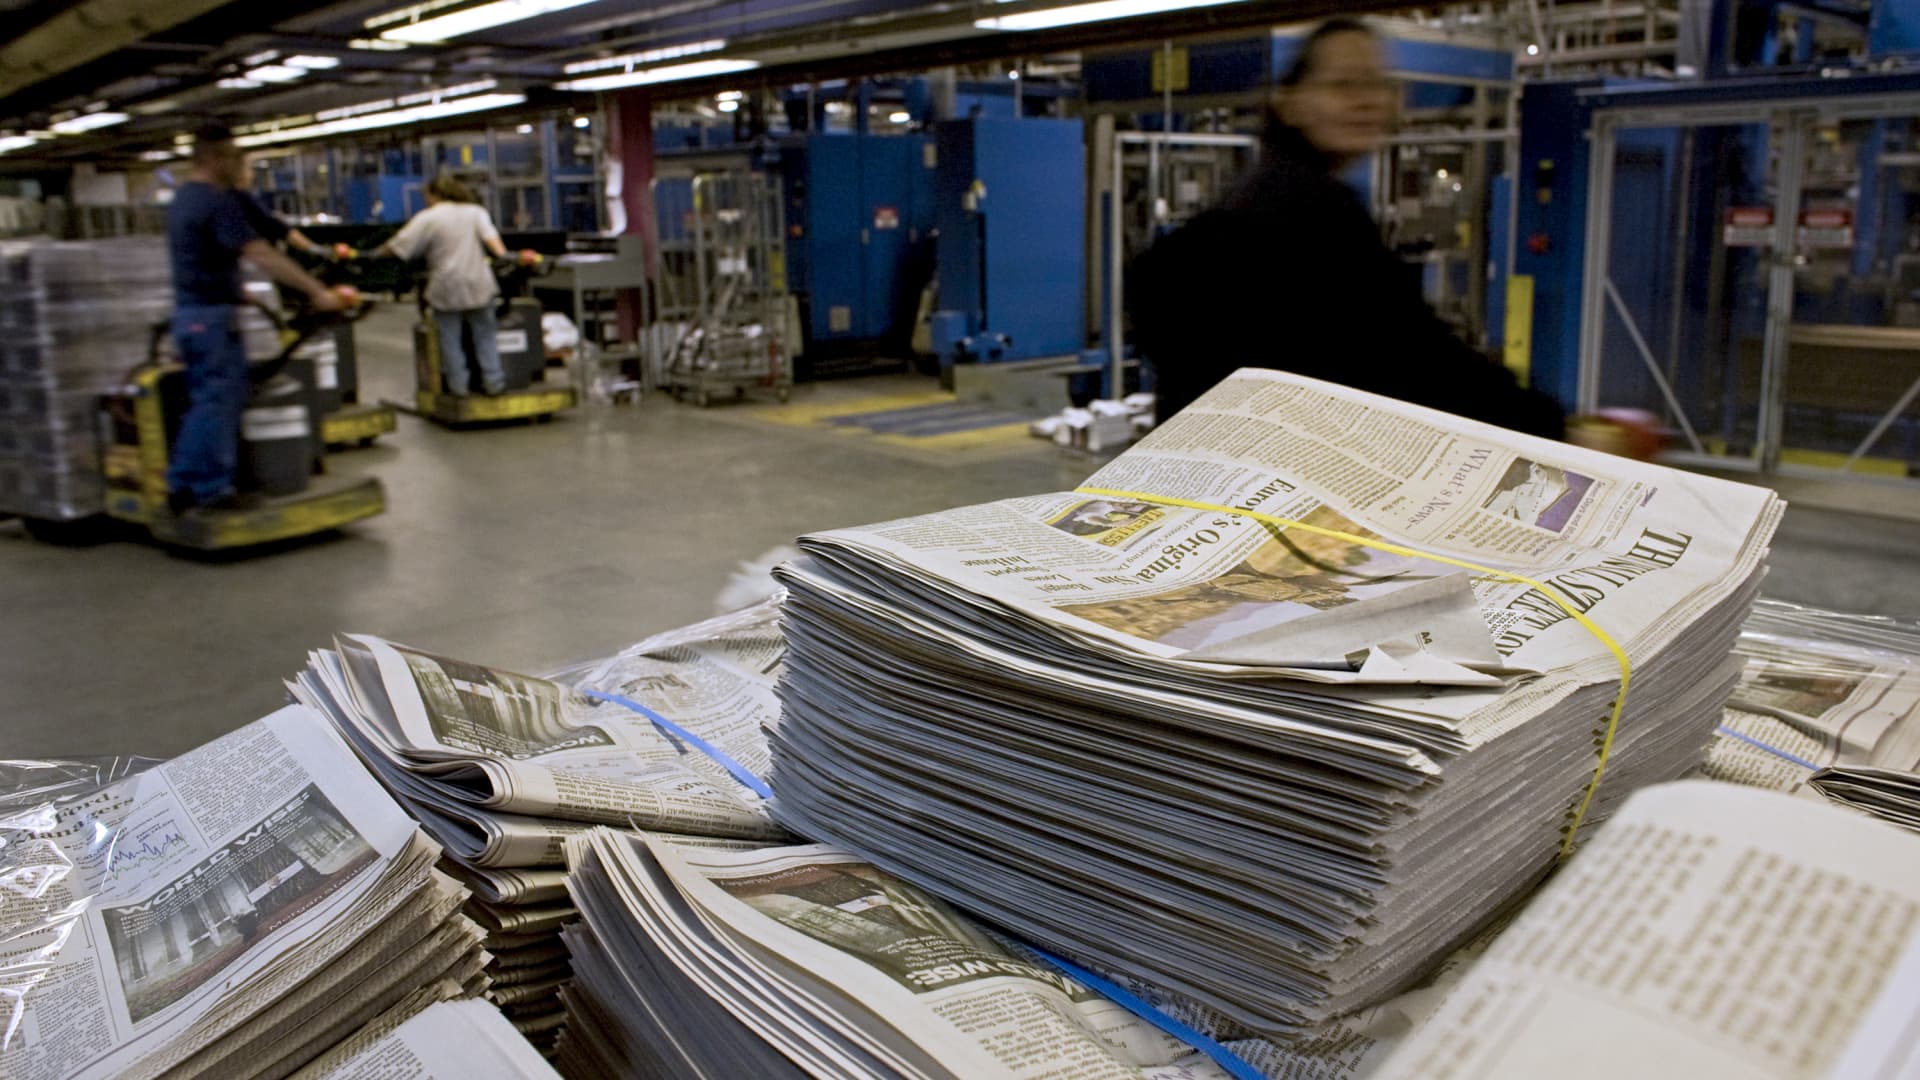 Stacks of The Wall Street Journal newspaper wait to be distributed.